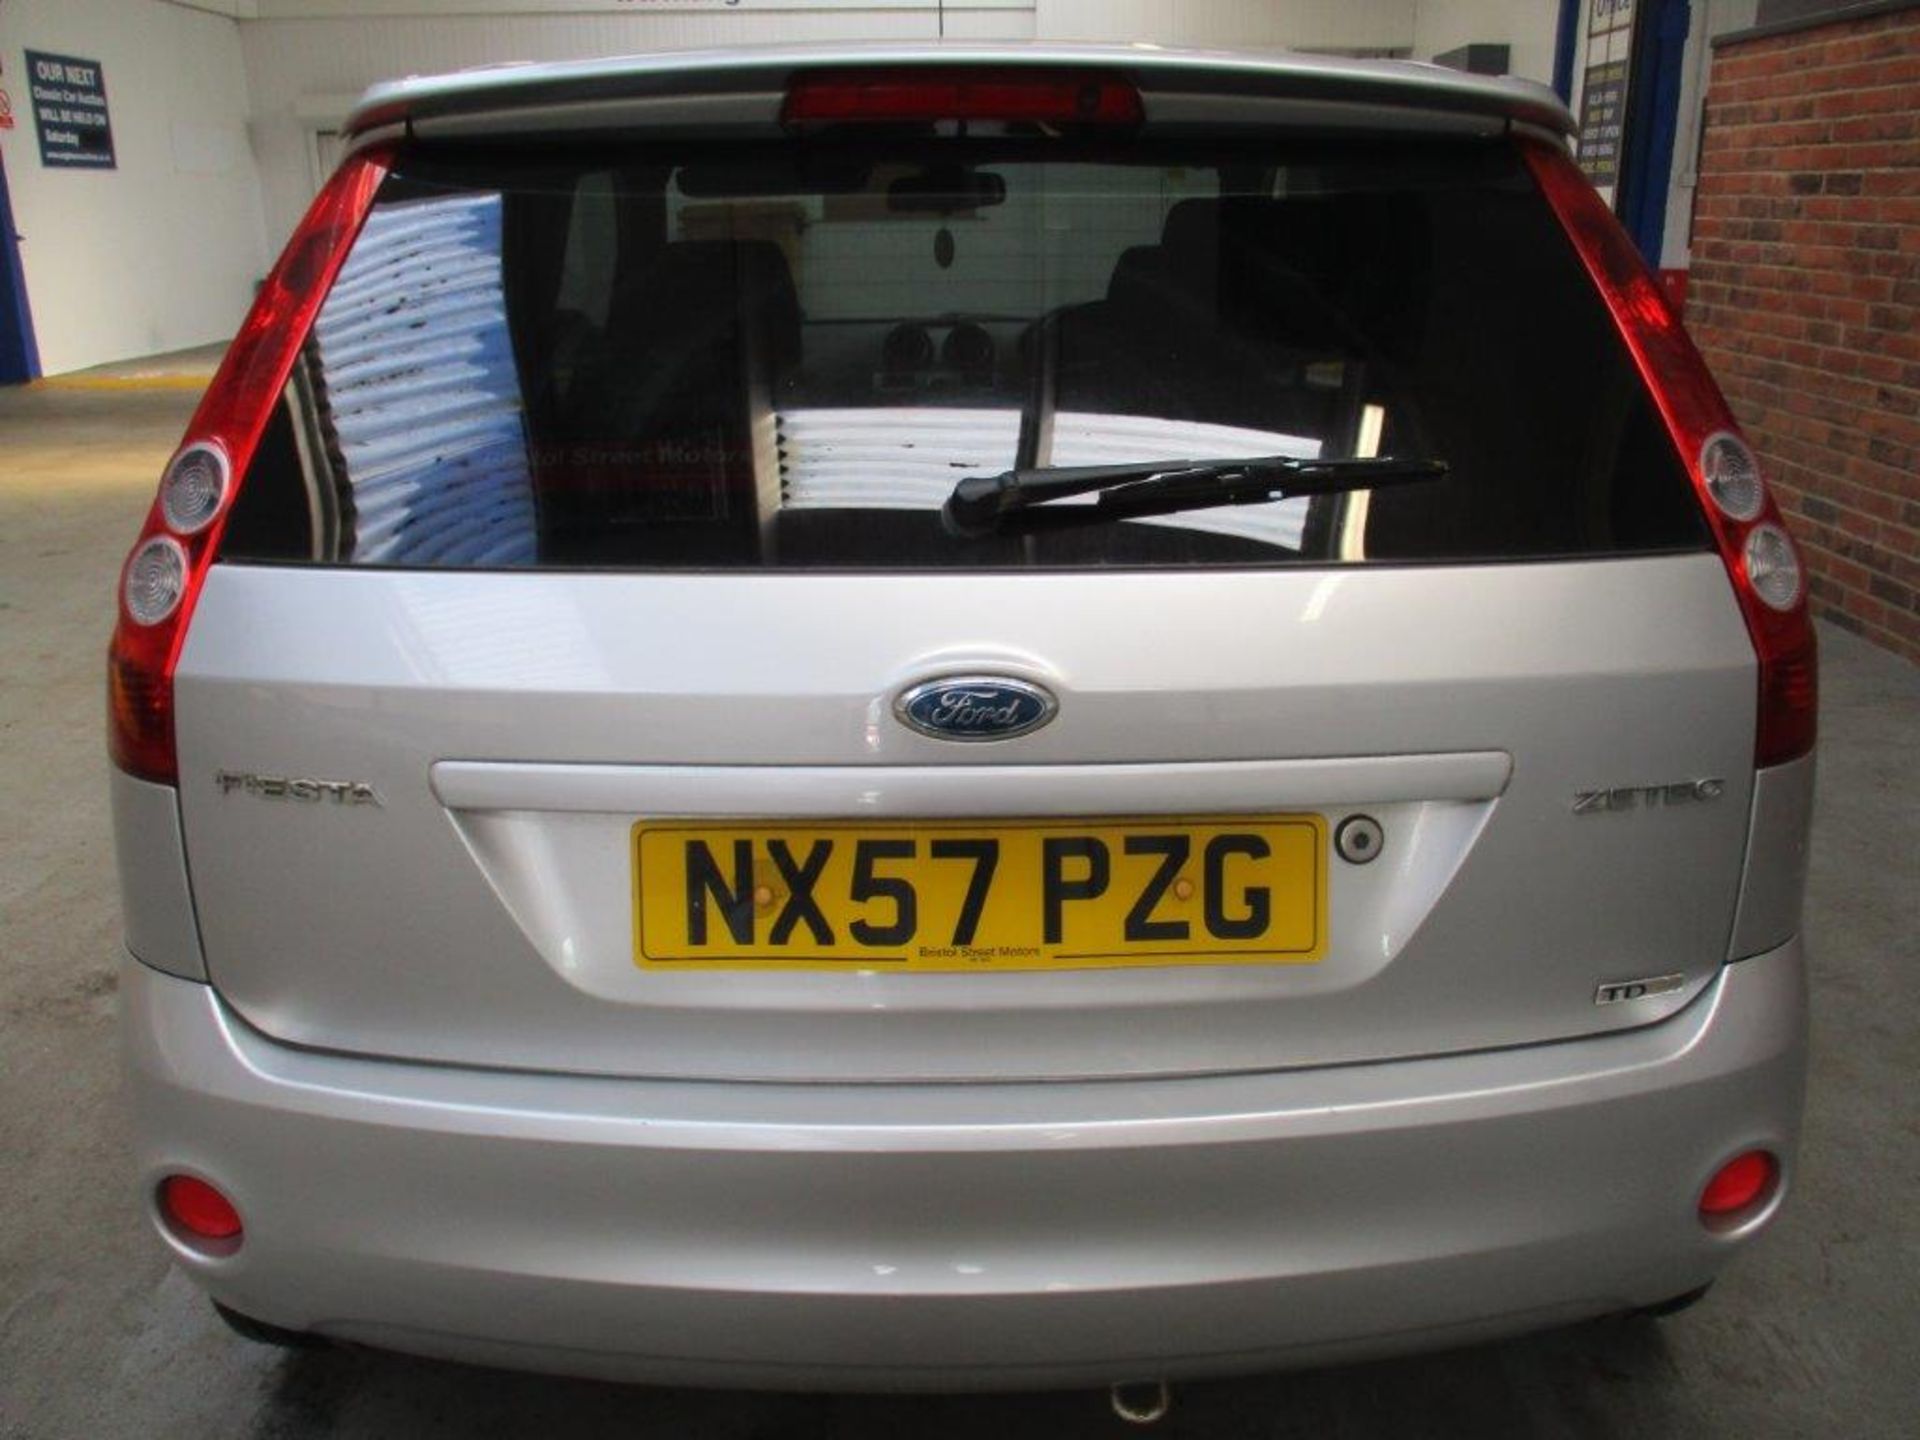 57 07 Ford Fiesta Zetec Climate TDCI - Image 4 of 16